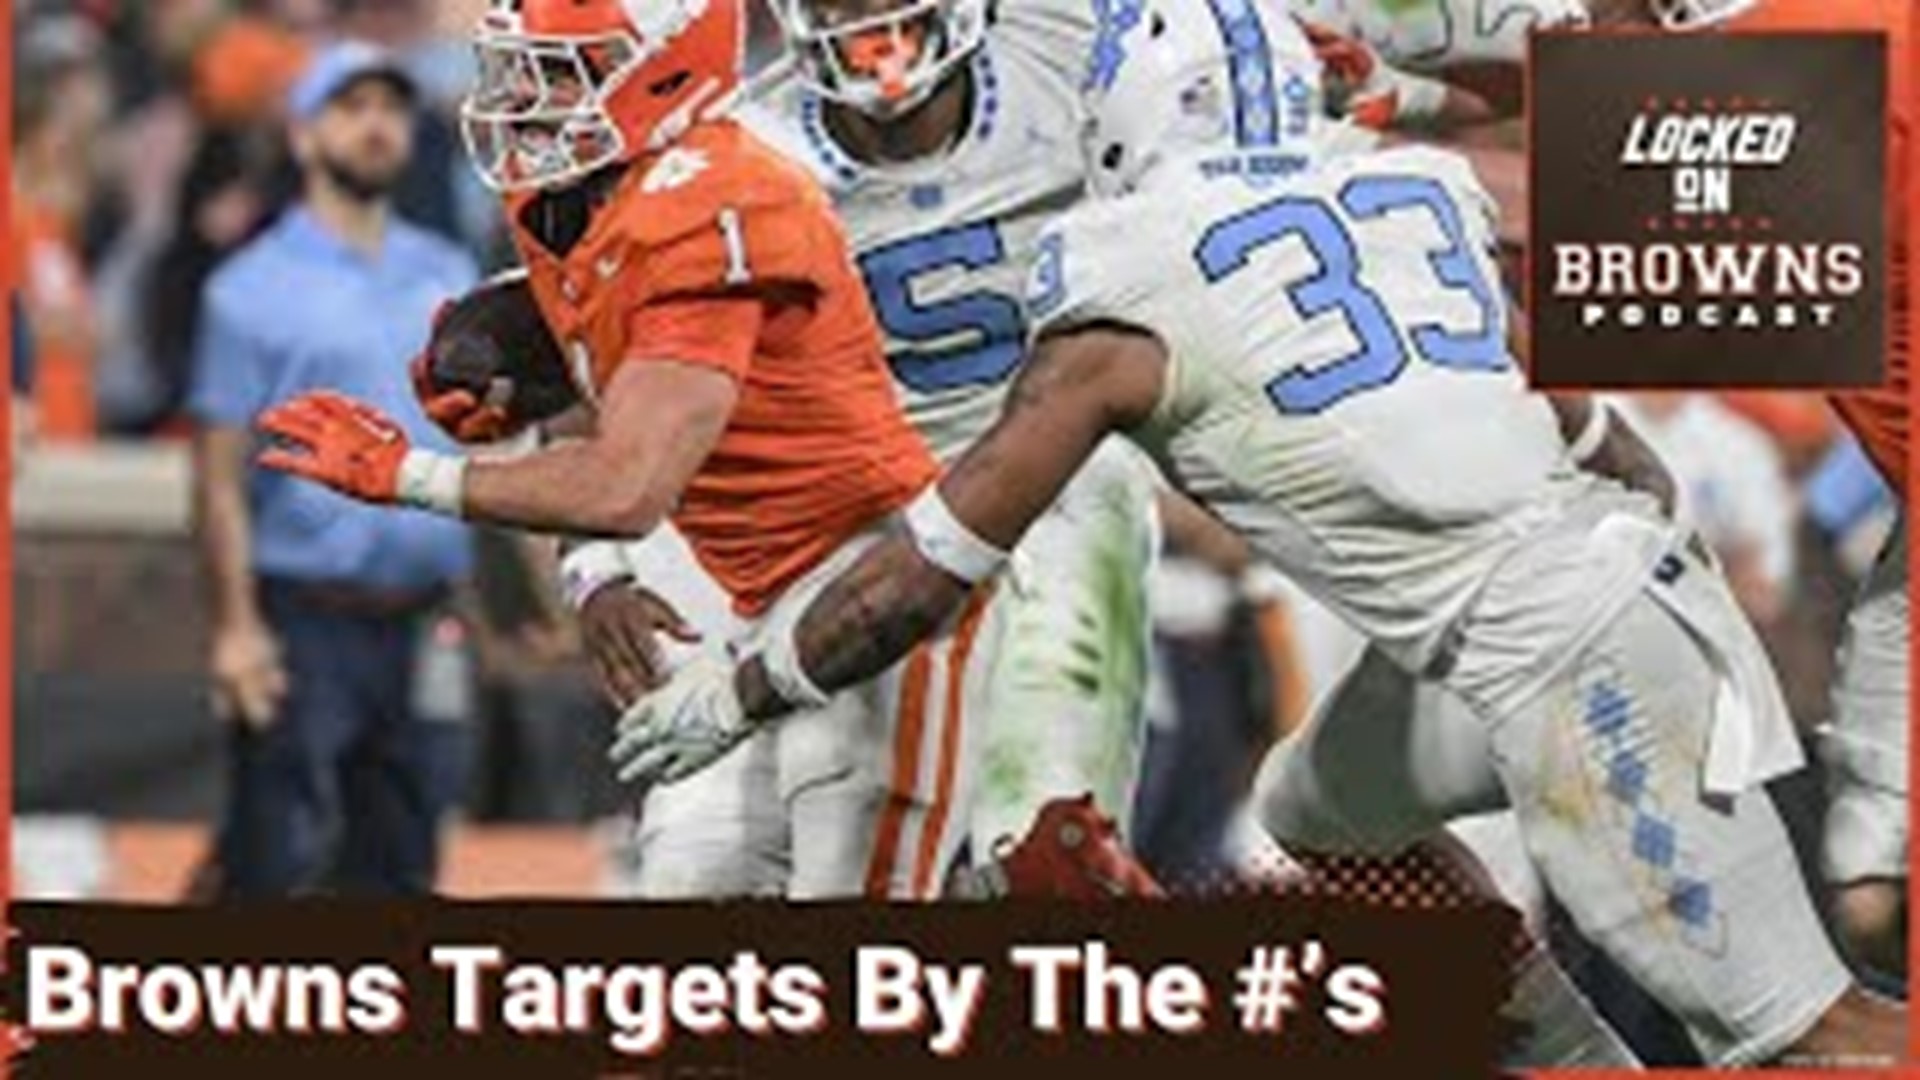 Jim Cobern of All Pro Football Data joins once again to as defensive prospects are discussed as their data is compared to players of the past.